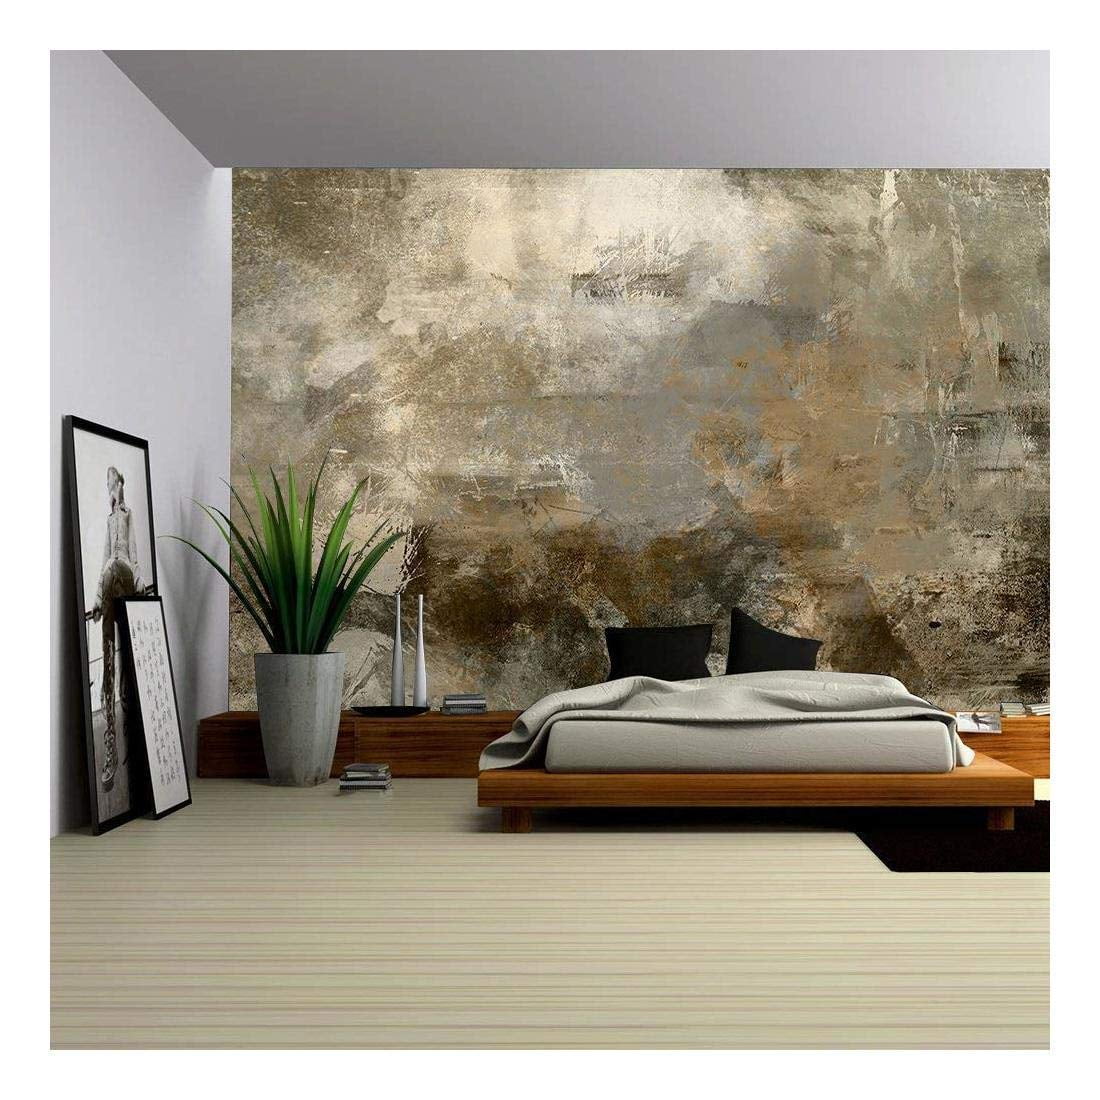 Monochrome Village and Tree Wall Wallpaper Peel and Stick Mural Poster Classic Art Living Room Bedroom Self Adhesive Wall Poster